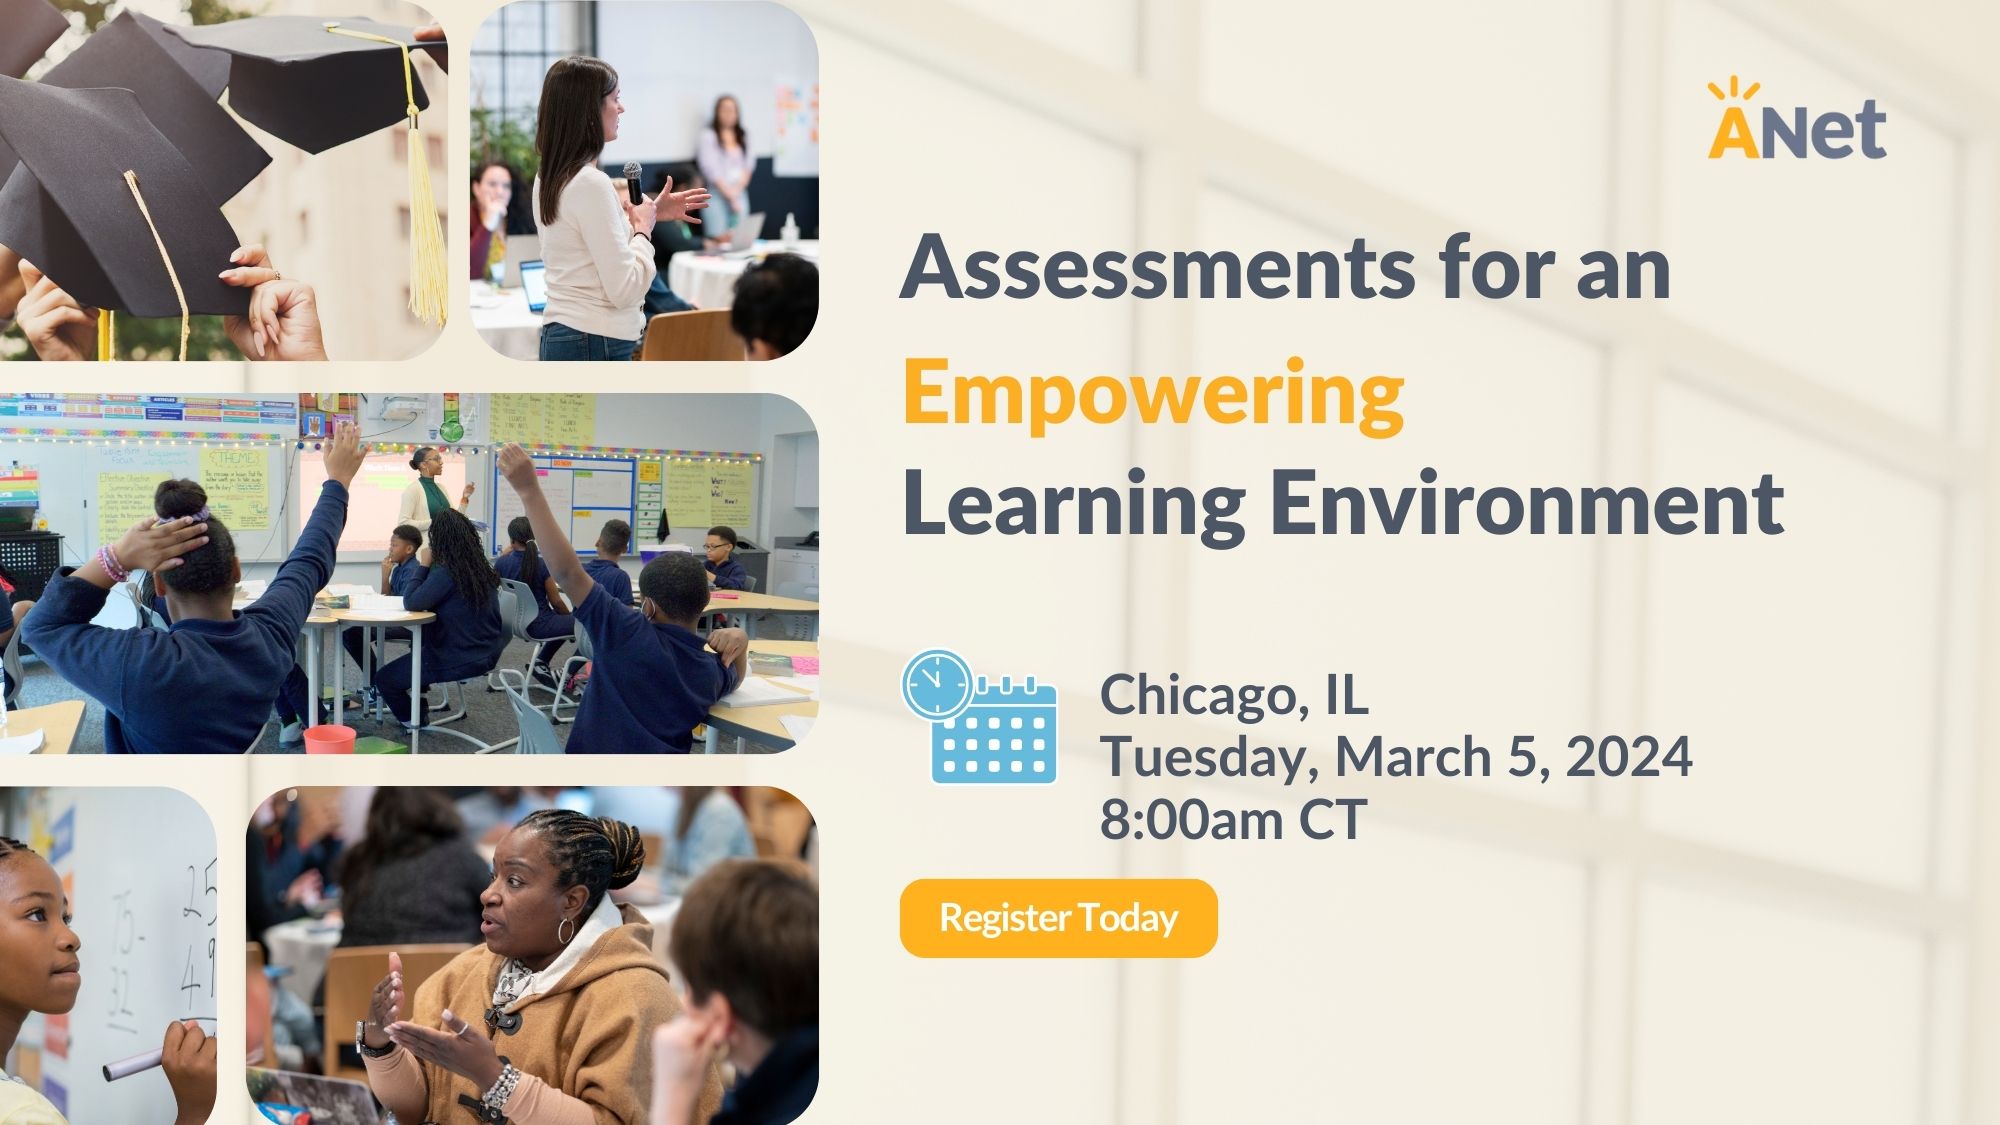 Assessments for an Empowering Learning Environment